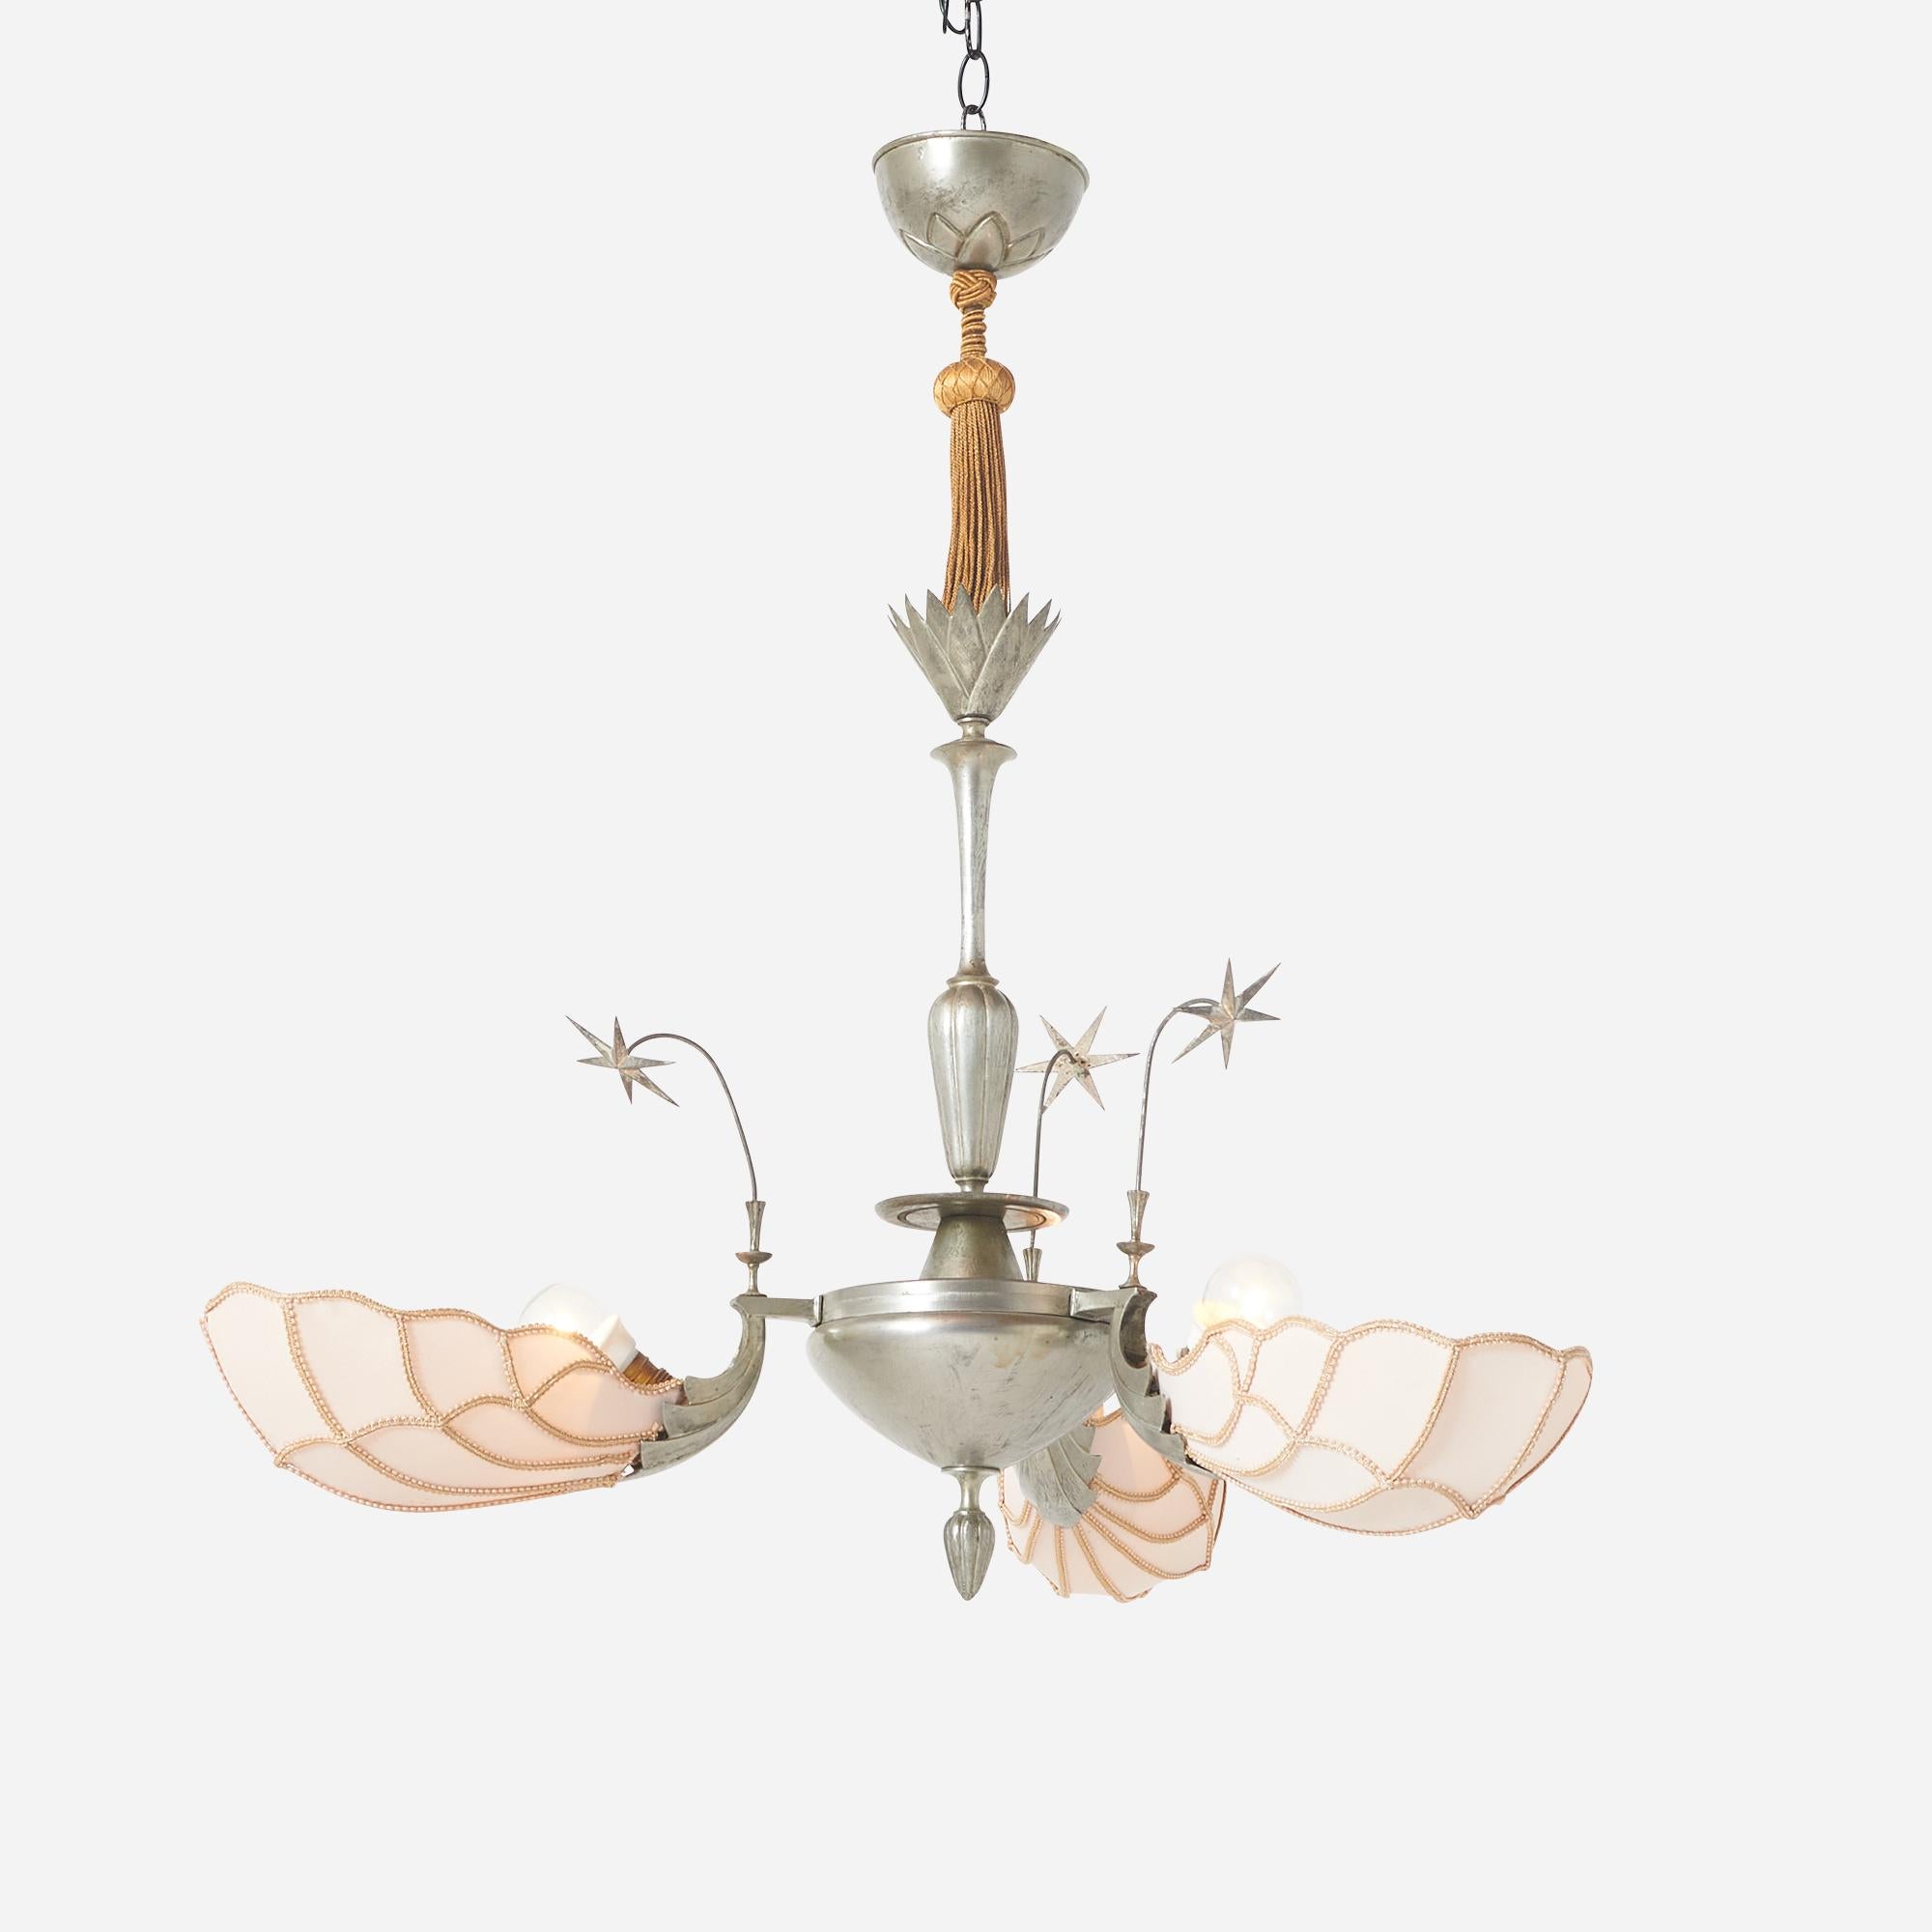 A Deco Chandelier of pewter and fabric - decorated with tassels and stars. Designed by an unknown creator.